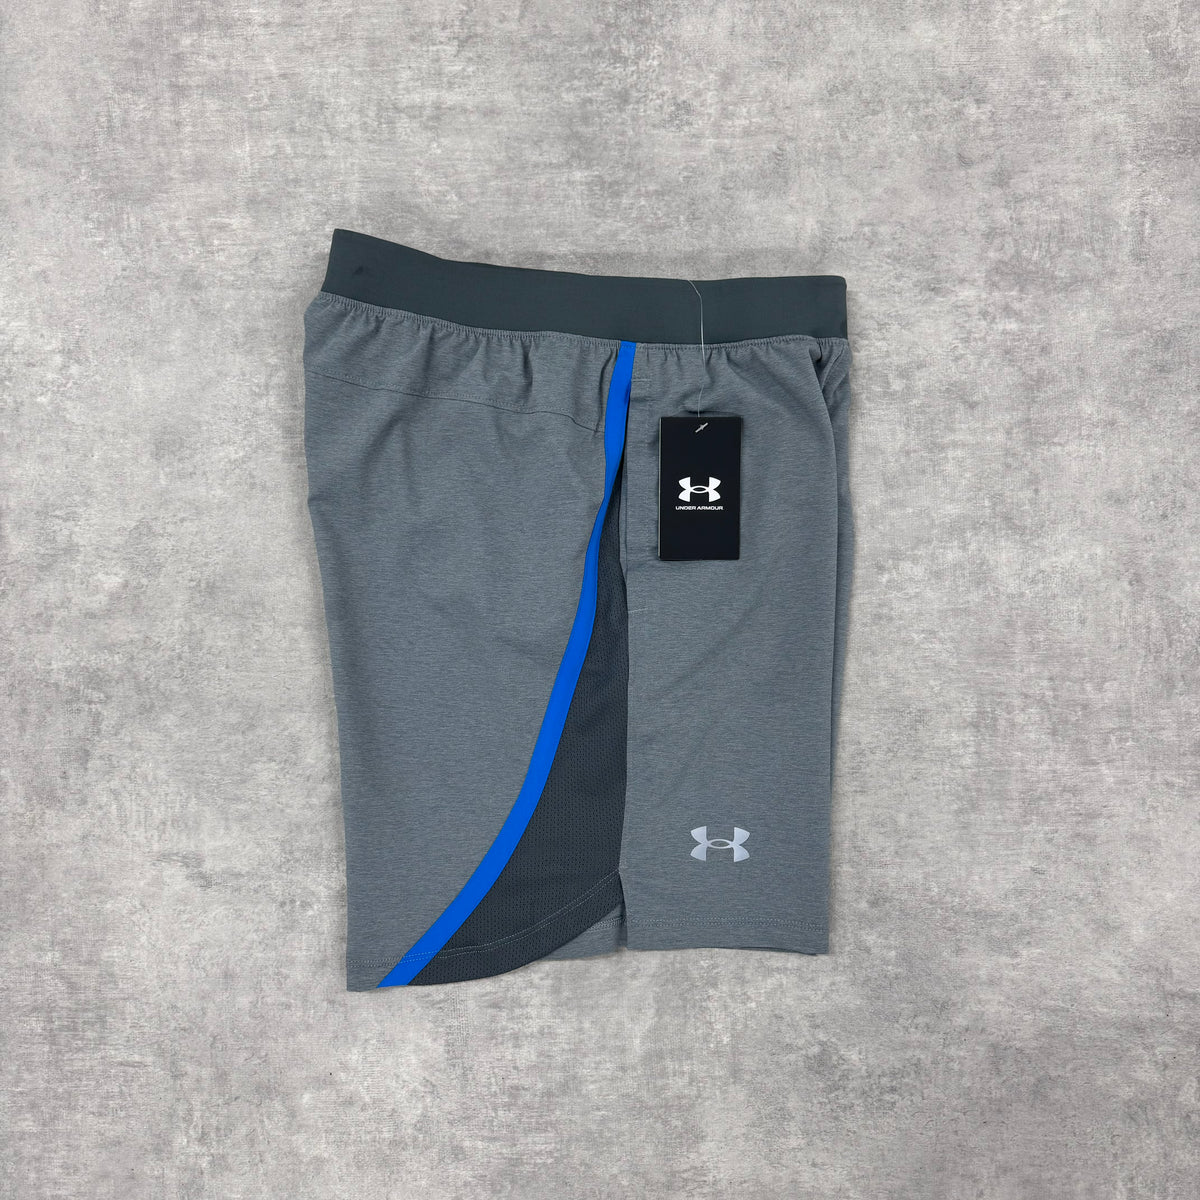 UNDER ARMOUR LAUNCH SHORTS 7” - GREY / BLUE